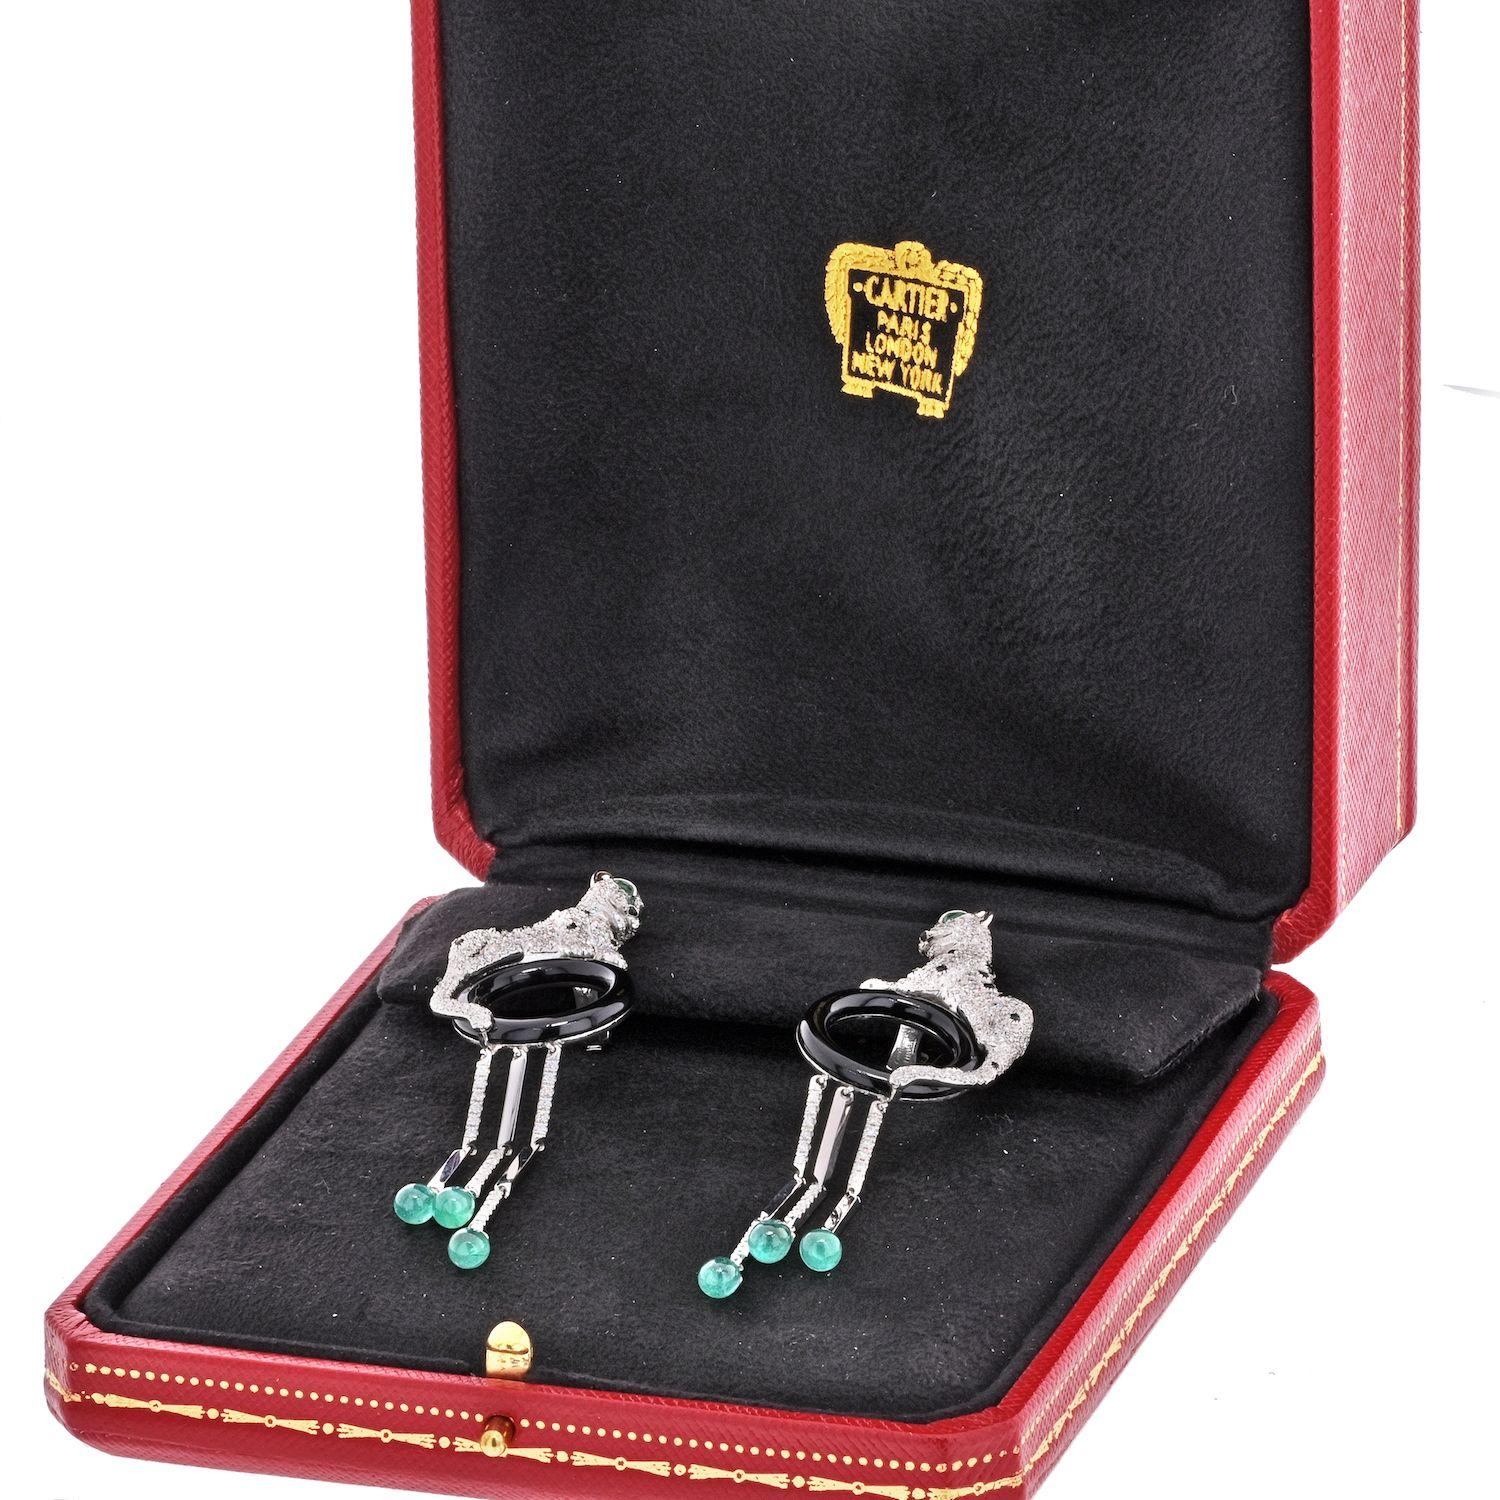 Spectacular Cartier Panthere Diamond Tassel Earrings. Each designed as a panther pavé-set with brilliant-cut diamonds, polished onyx and pear-shaped emerald eyes, upon an onyx hoop supporting three articulated pendants set with brilliant-cut